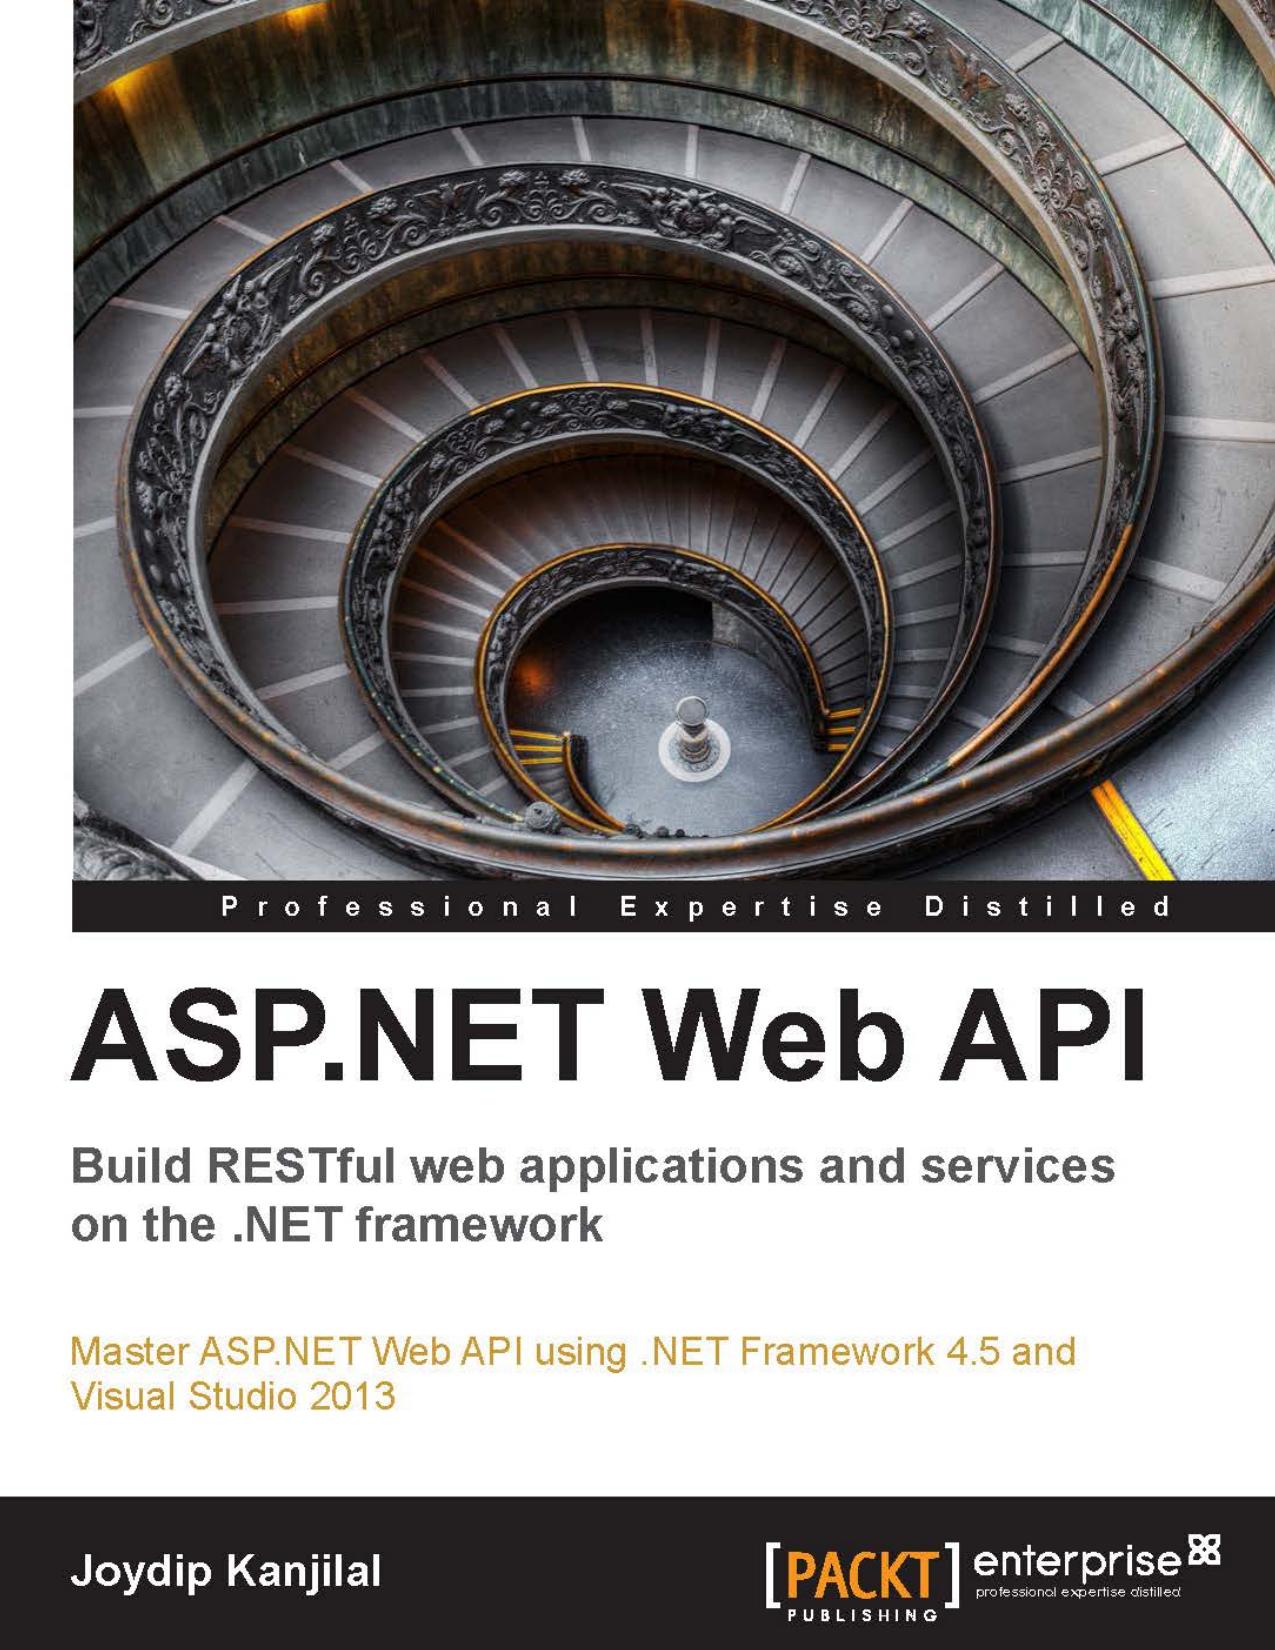 ASP.NET Web API: Build RESTful Web Applications and Services on the .NET Framework